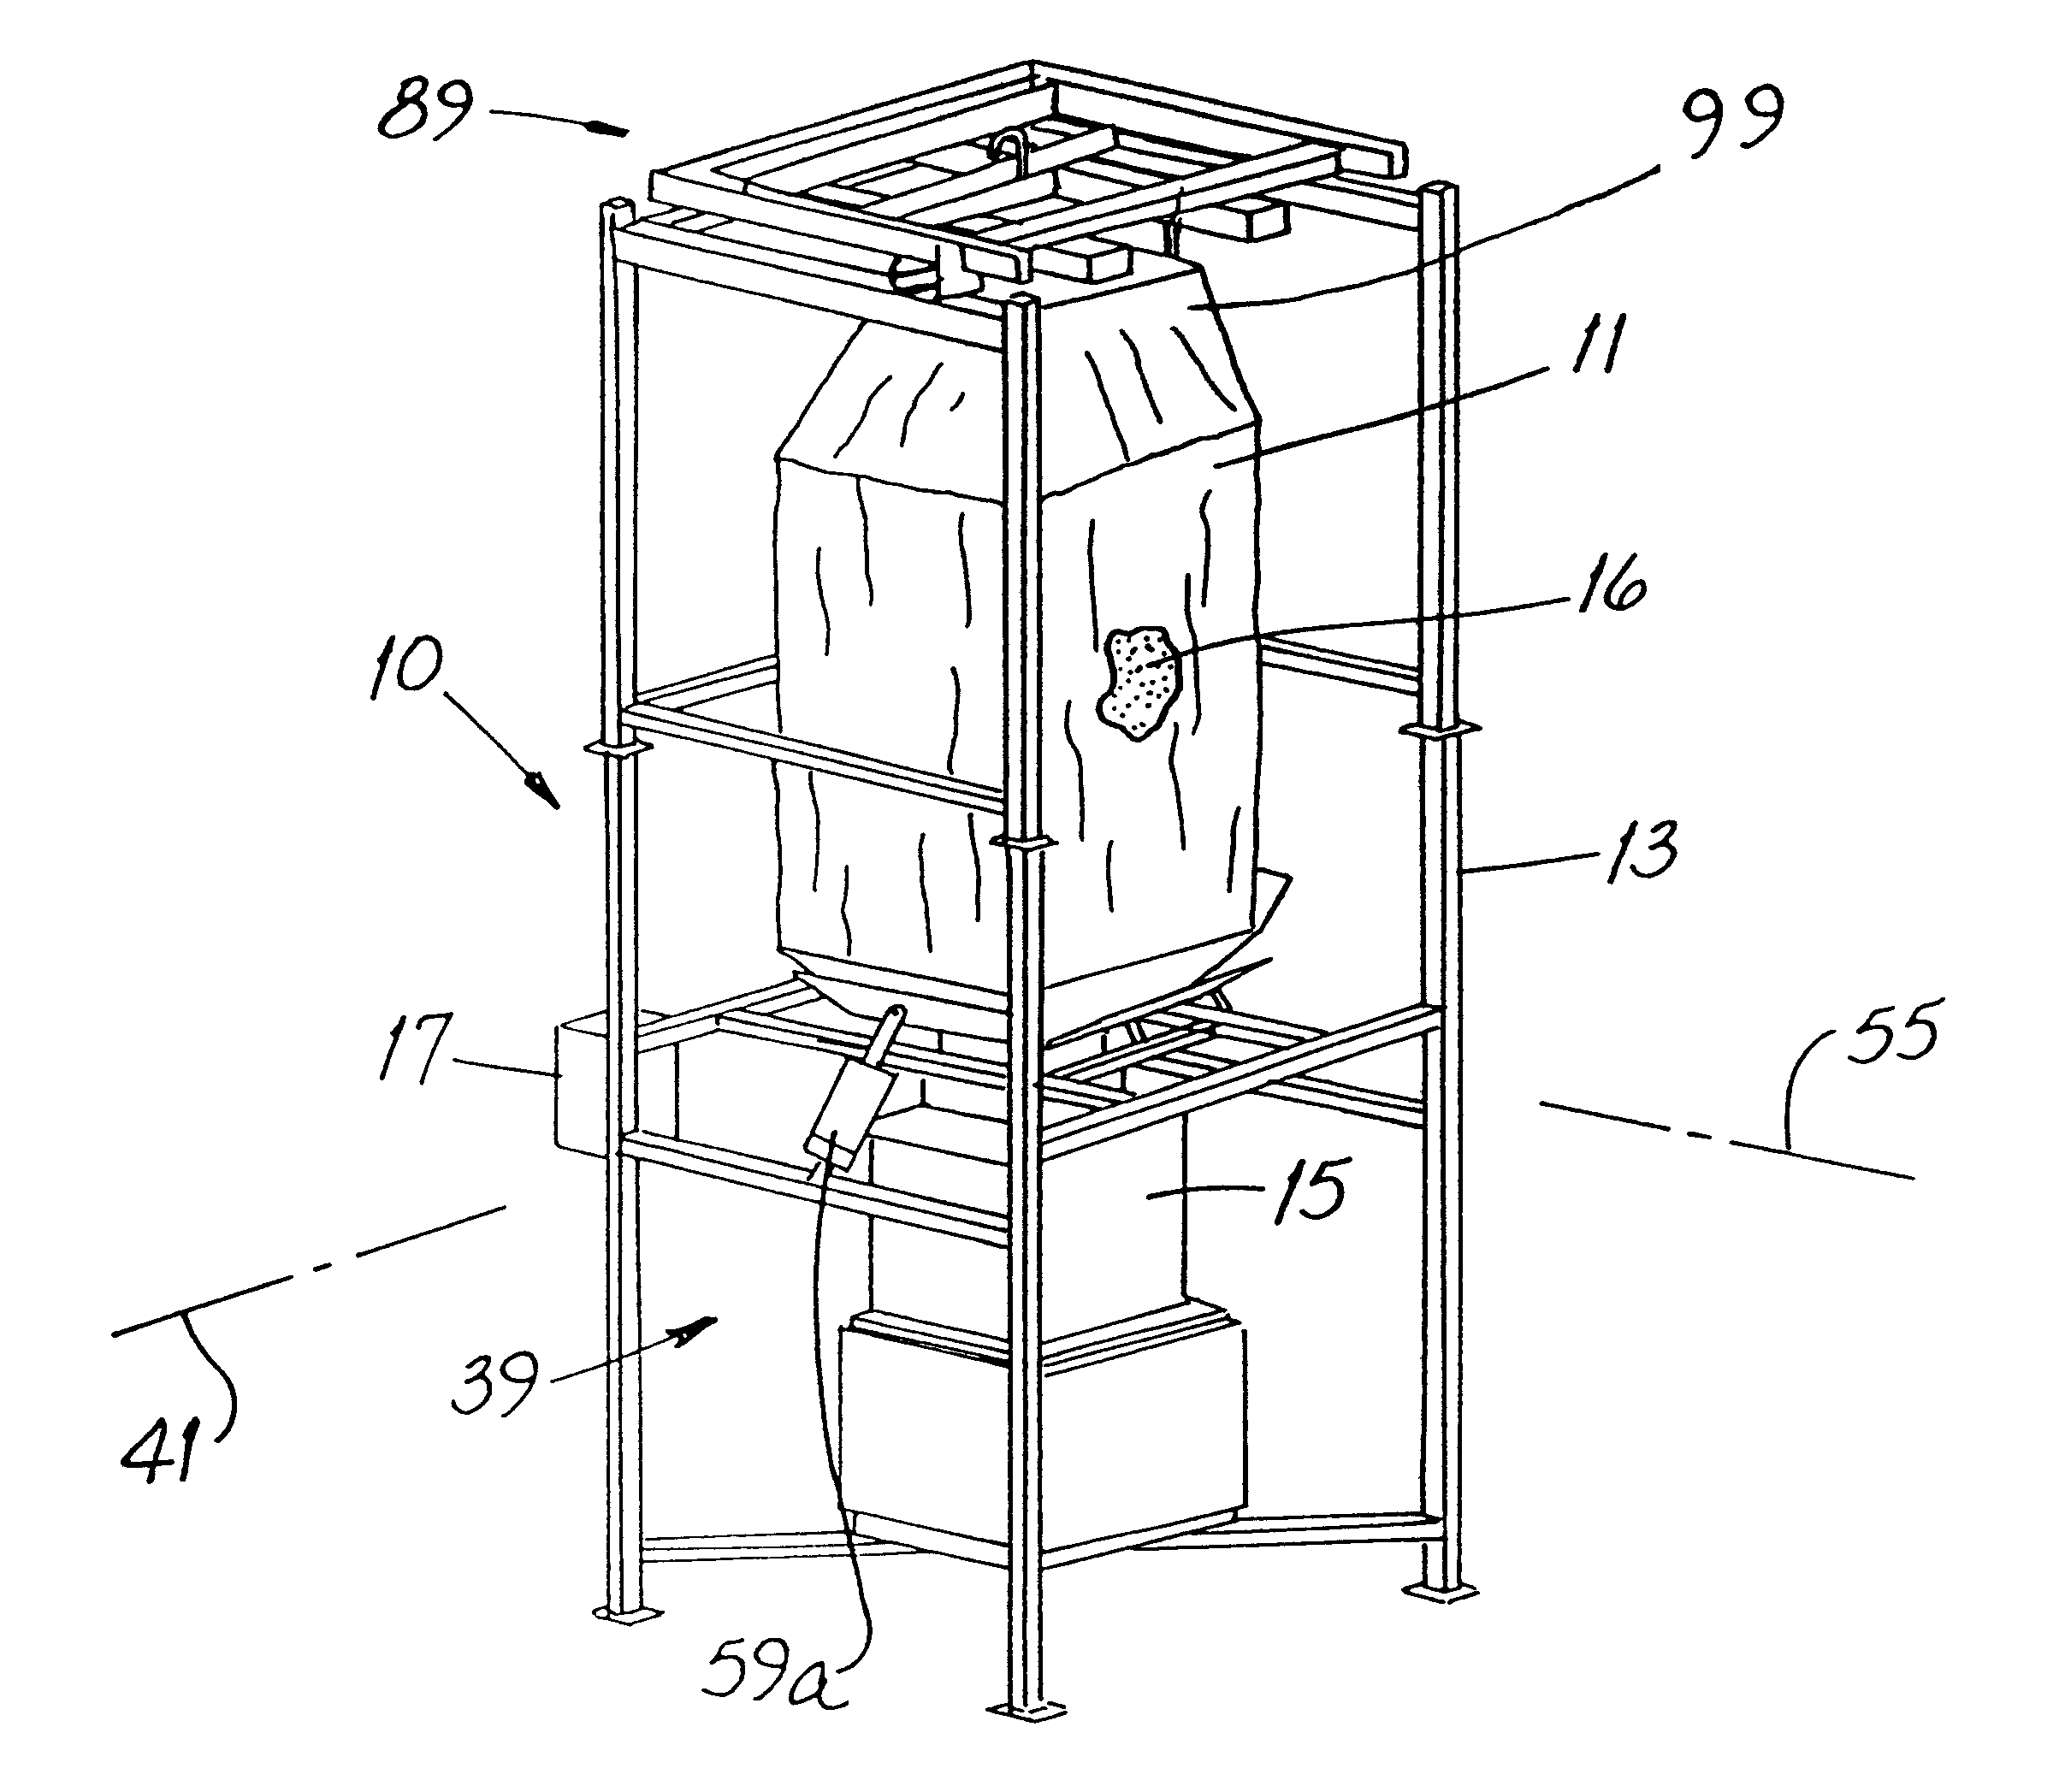 Machine and method for unloading a bulk-material bag